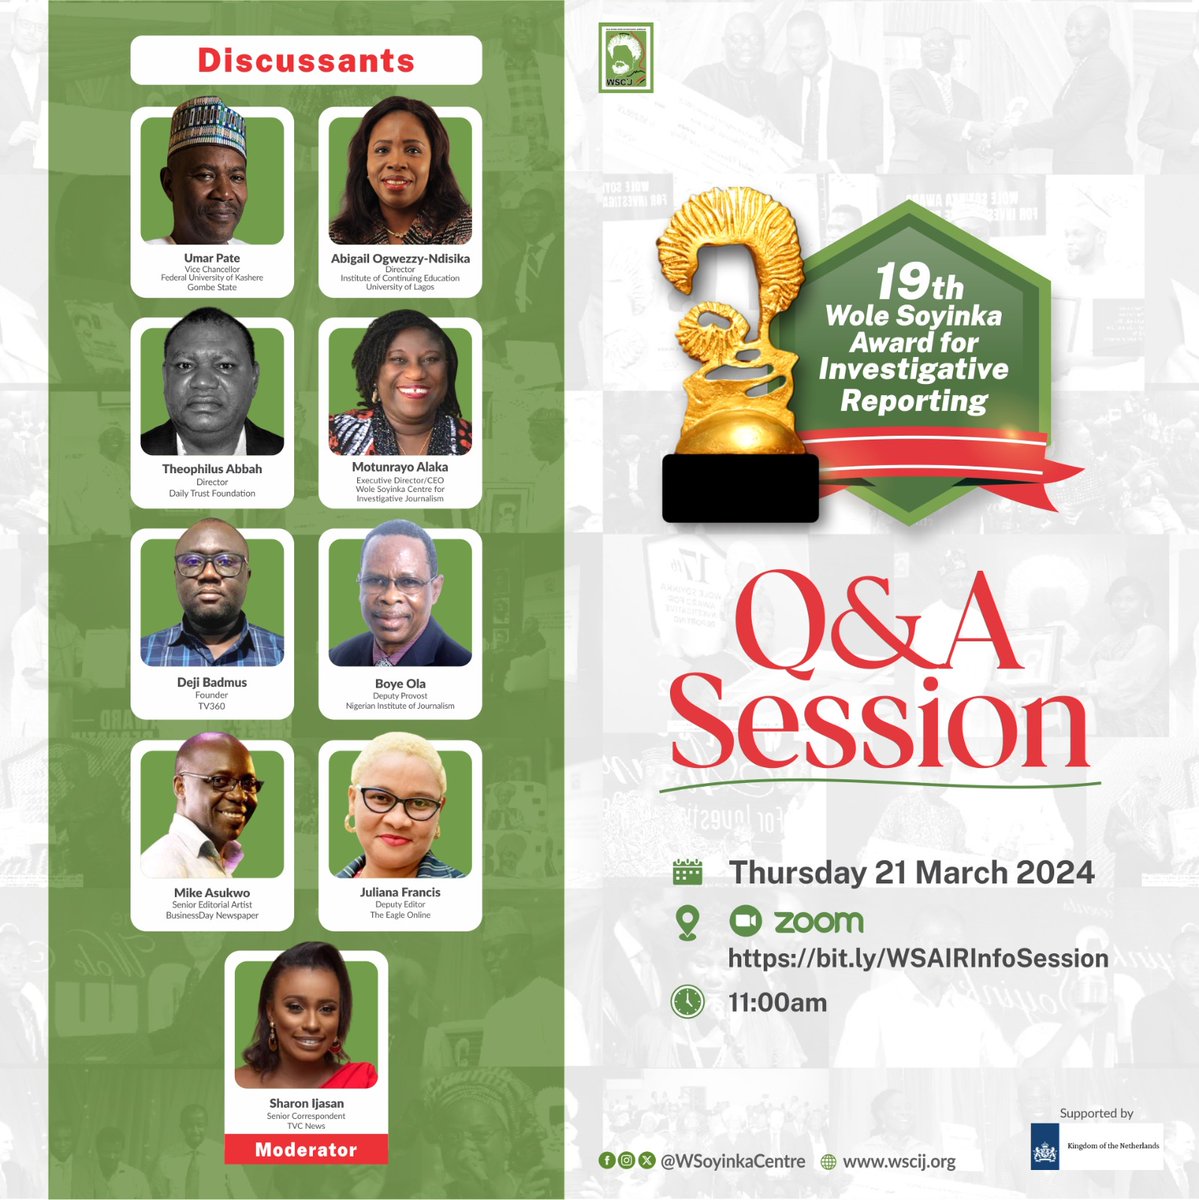 Join the @WSoyinkaCentre  for Investigative Journalism's virtual Q&A session on the 19th Wole Soyinka Award for Investigative Reporting.

🗓️ Thursday 21 March 2024

🕜 11am 

Register here 👉 bit.ly/WSAIRInfoSessi…

 #WSAIR2024